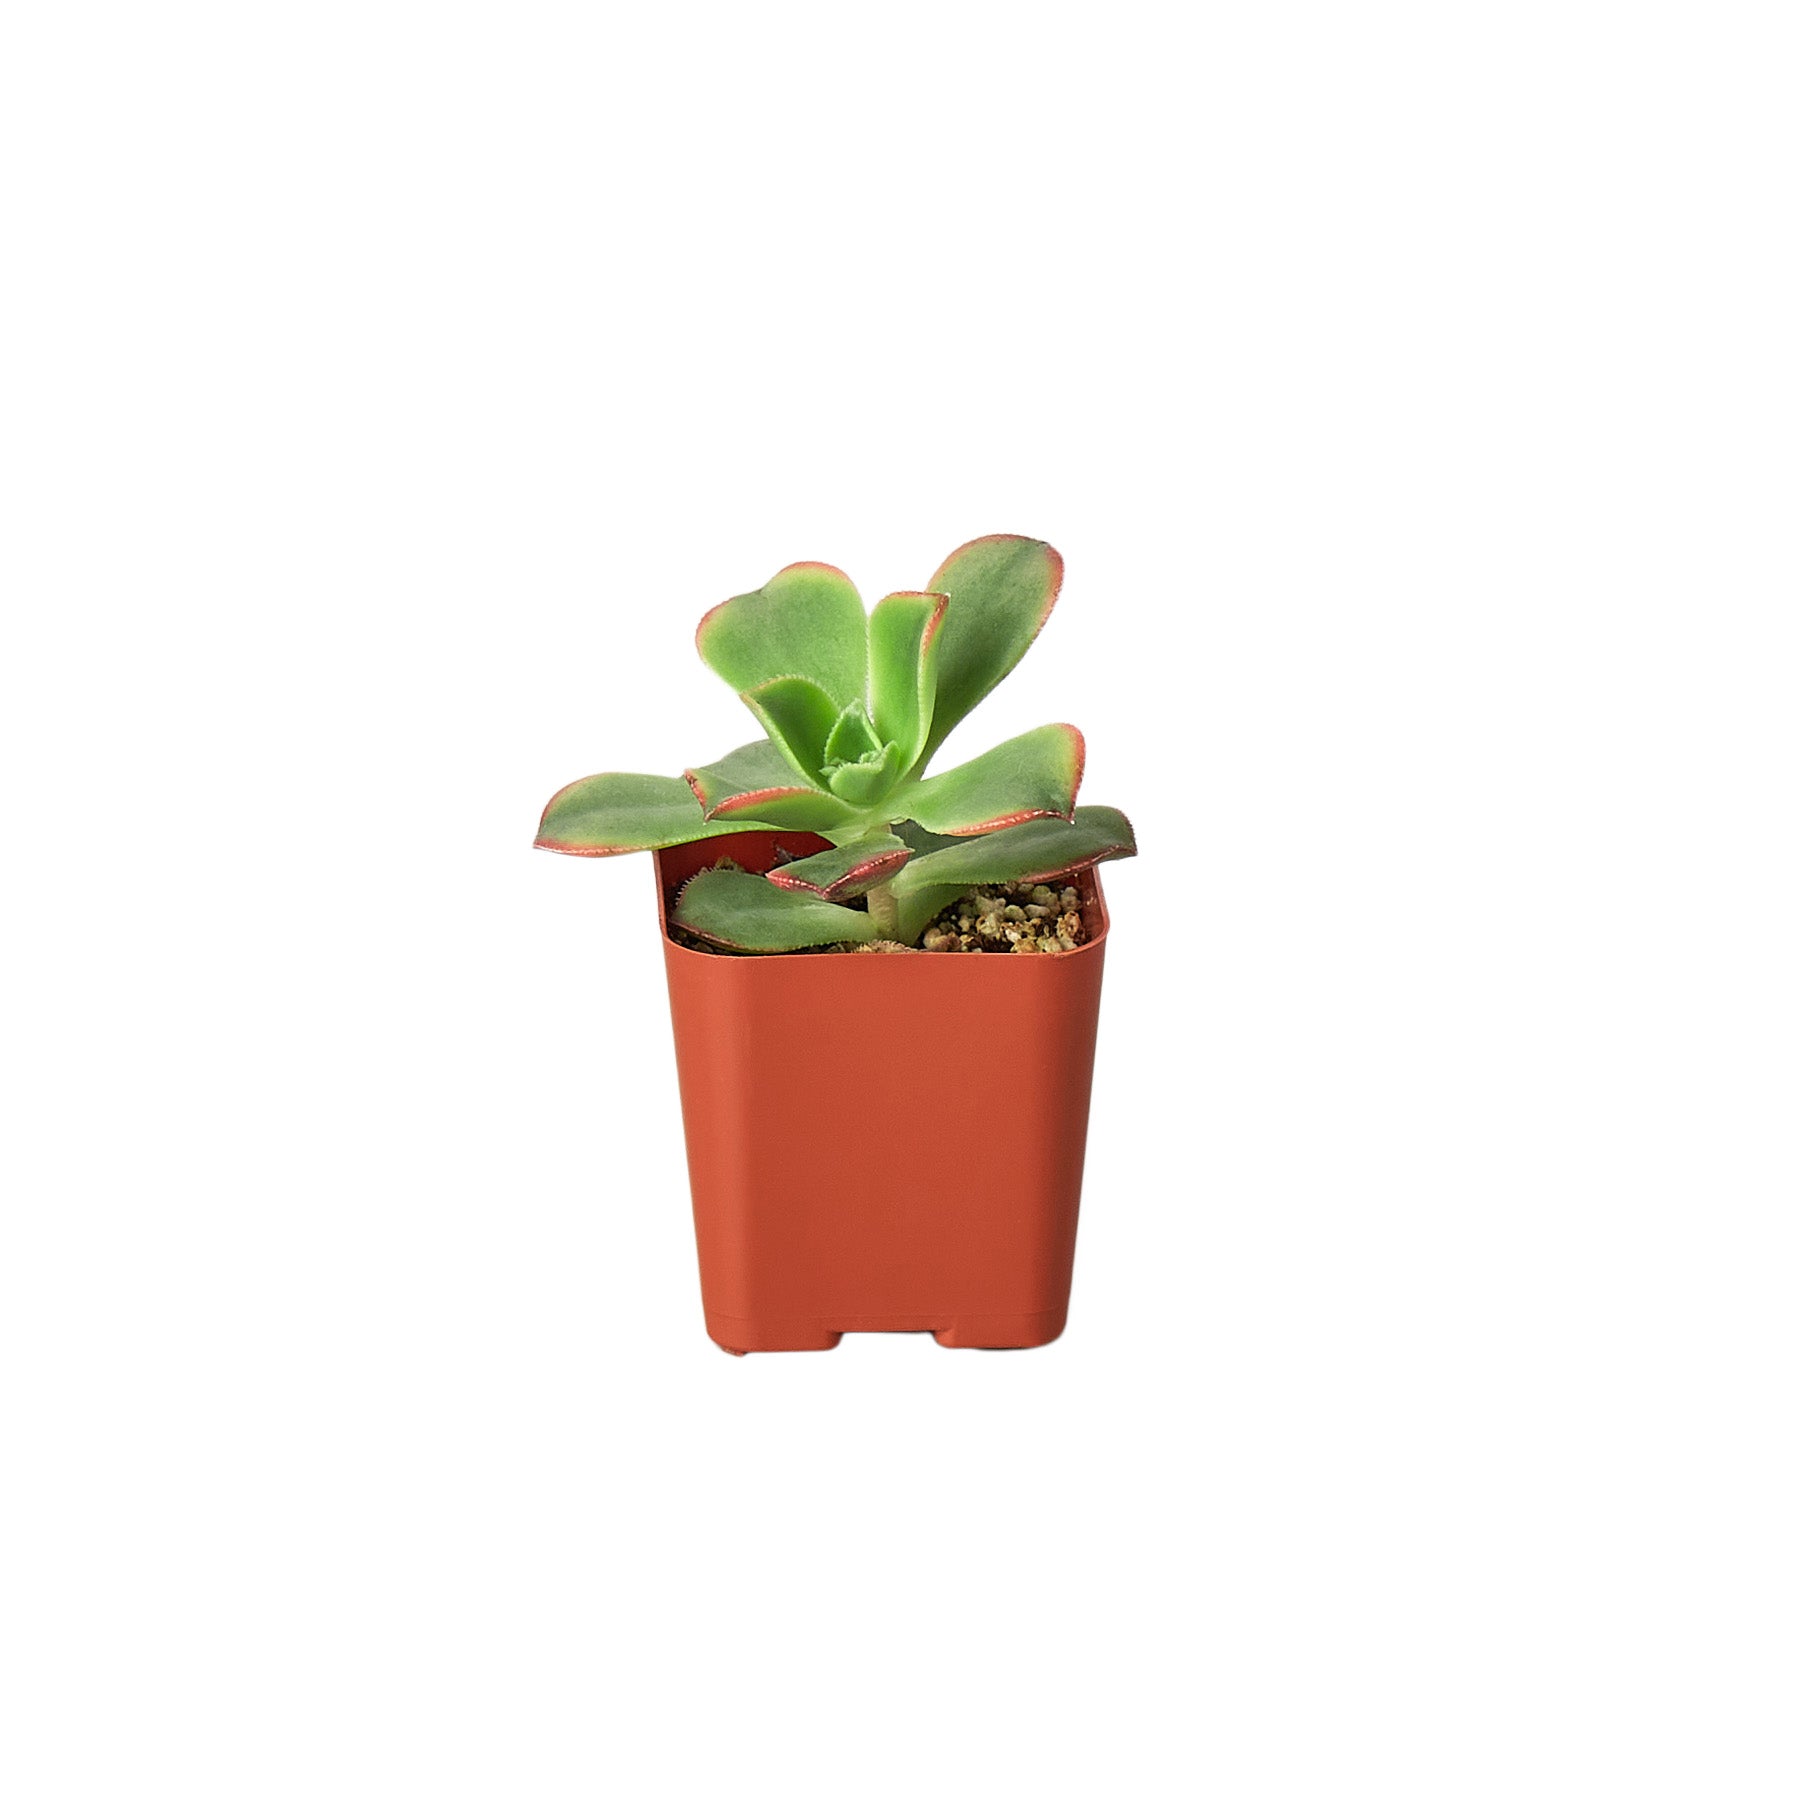 A small succulent plant in a red pot showcased on a white background sold at a nearby plant nursery.